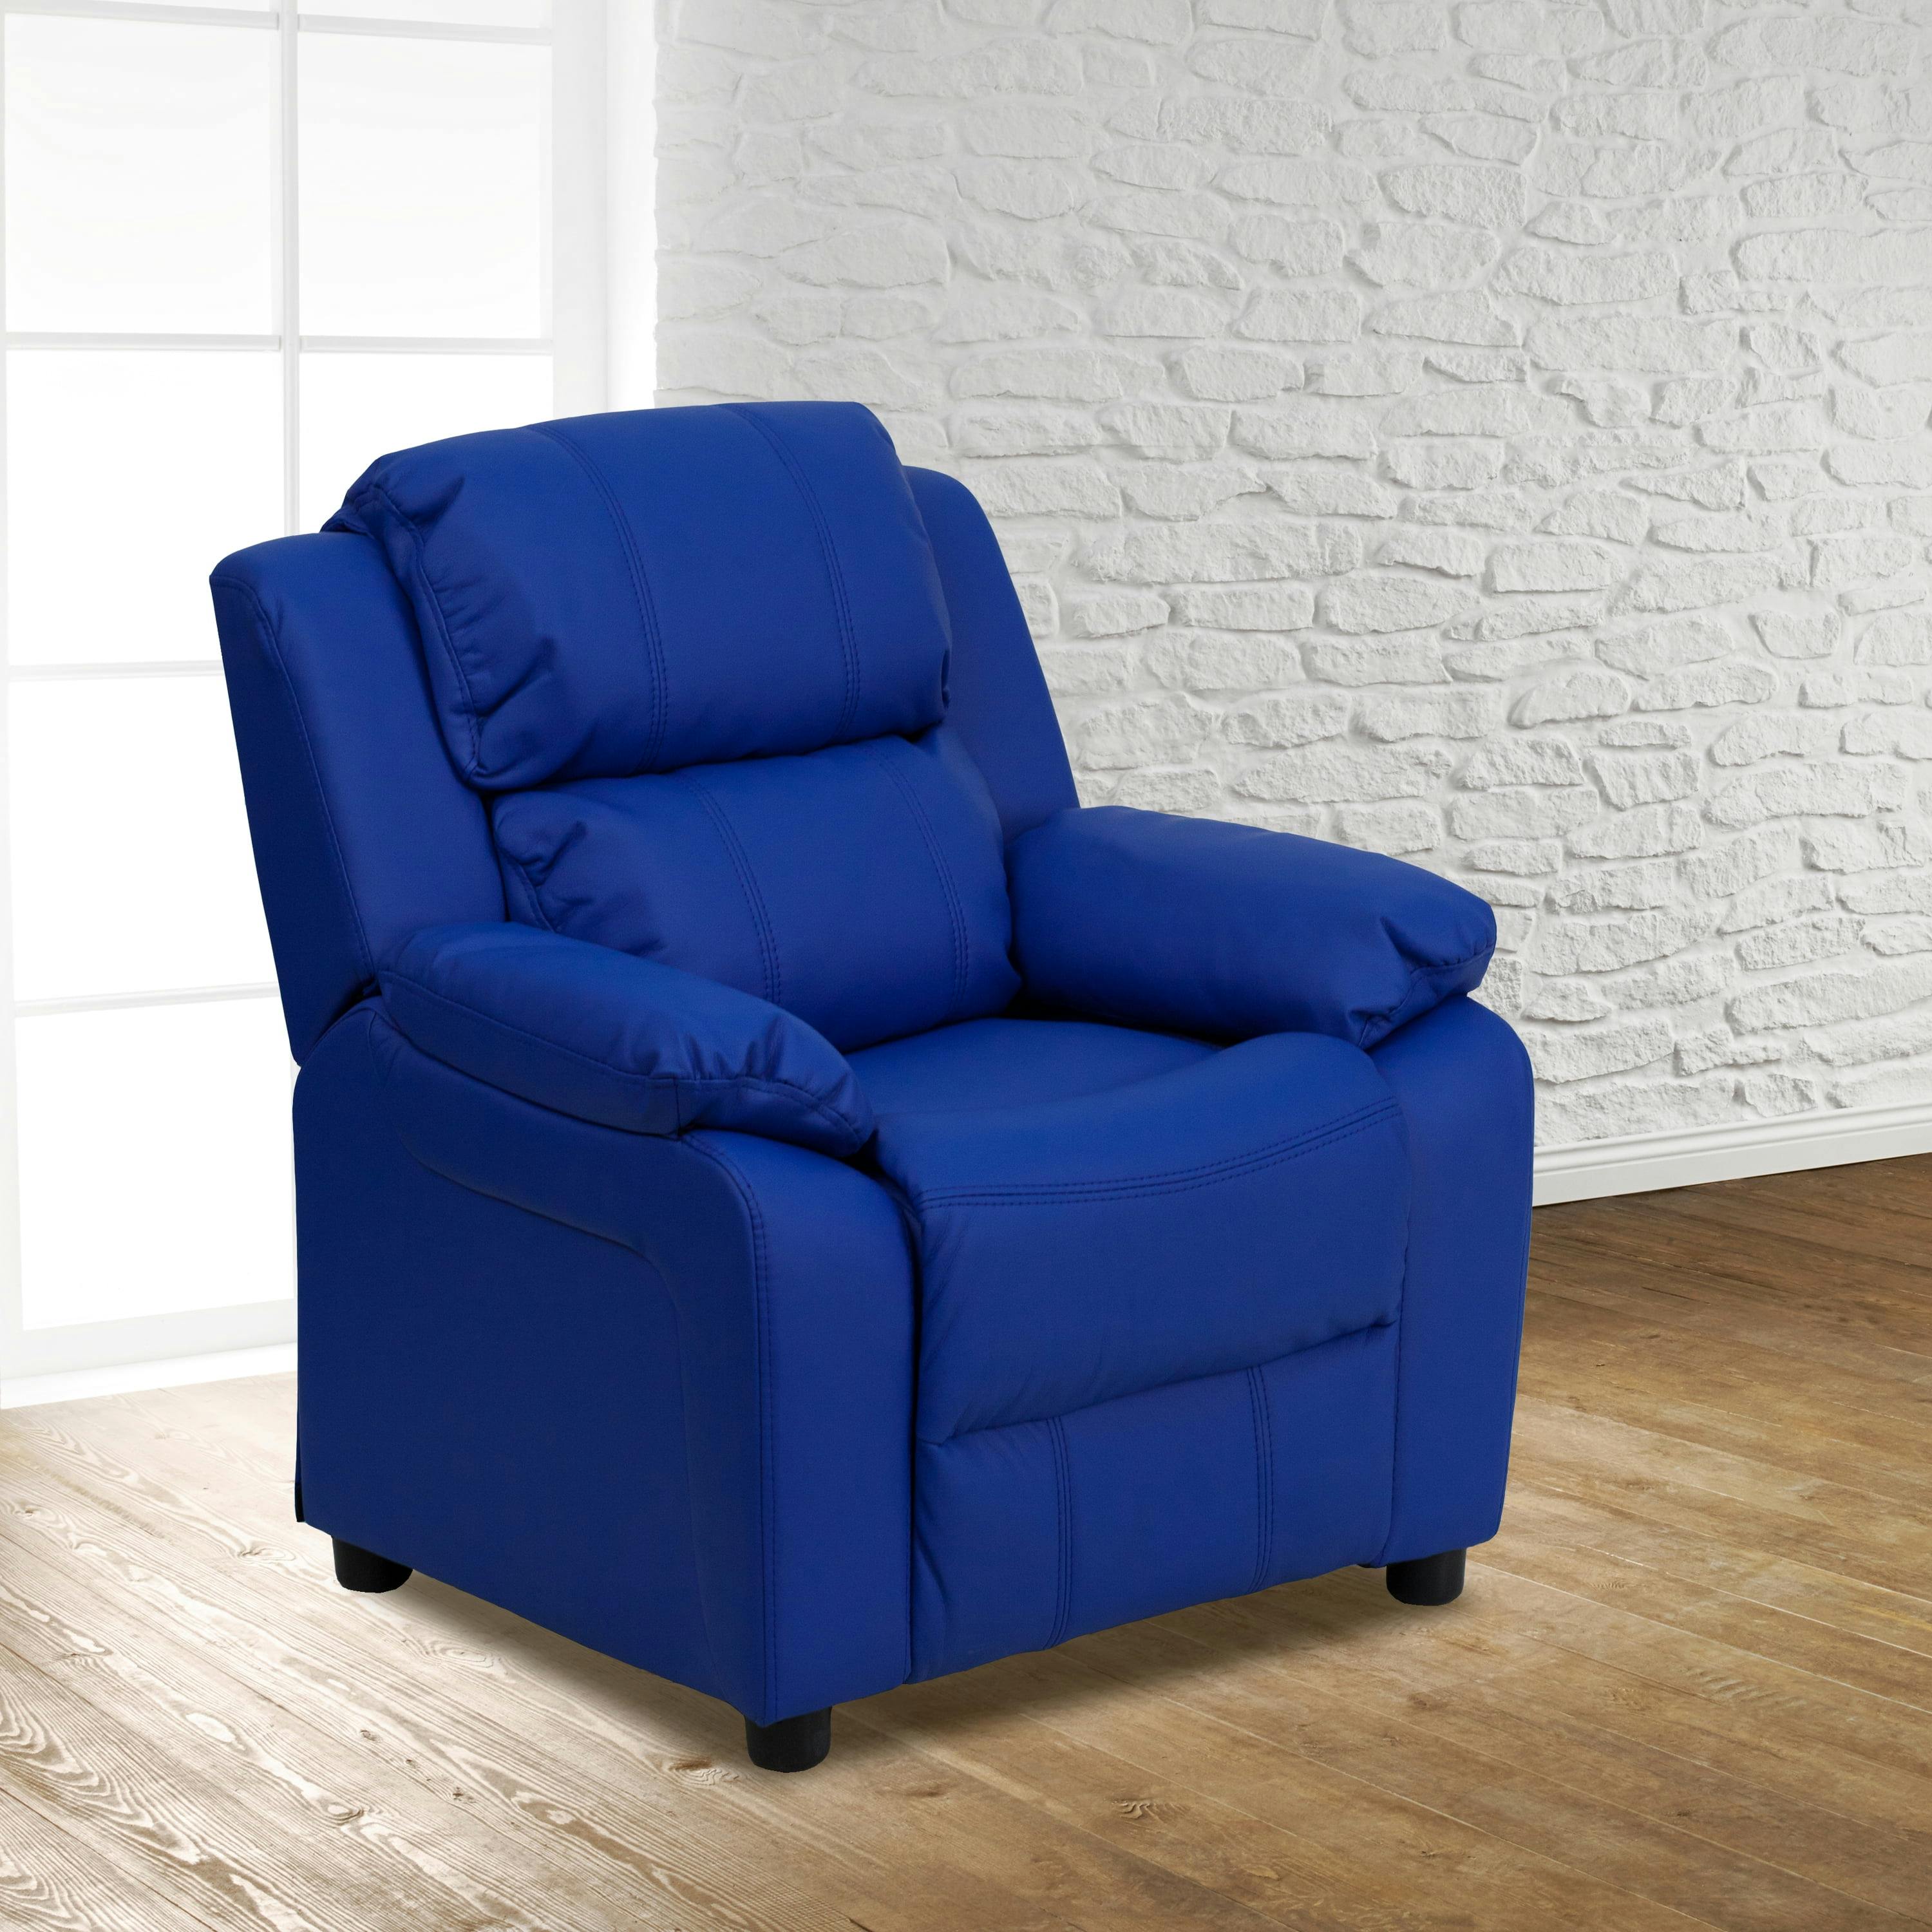 Cozy Spot Child-Sized Recliner with Storage Arms in Black Microfiber